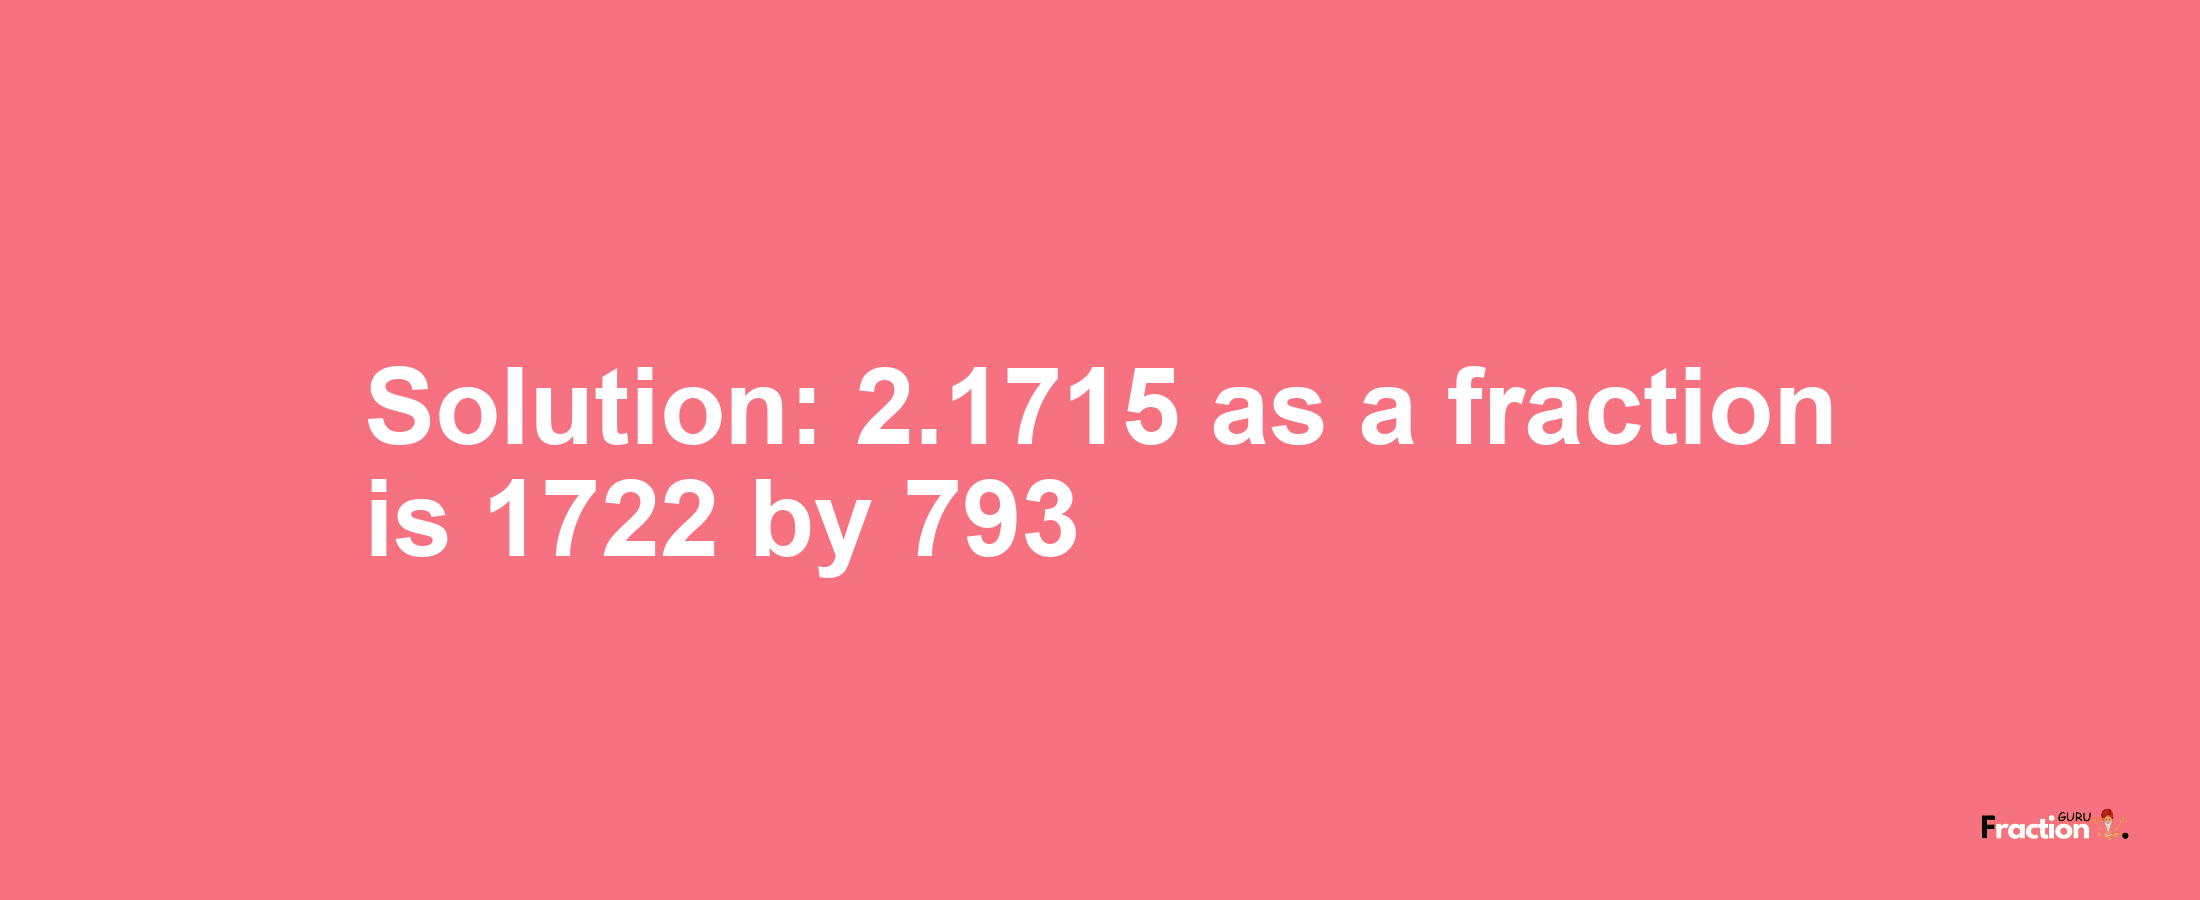 Solution:2.1715 as a fraction is 1722/793